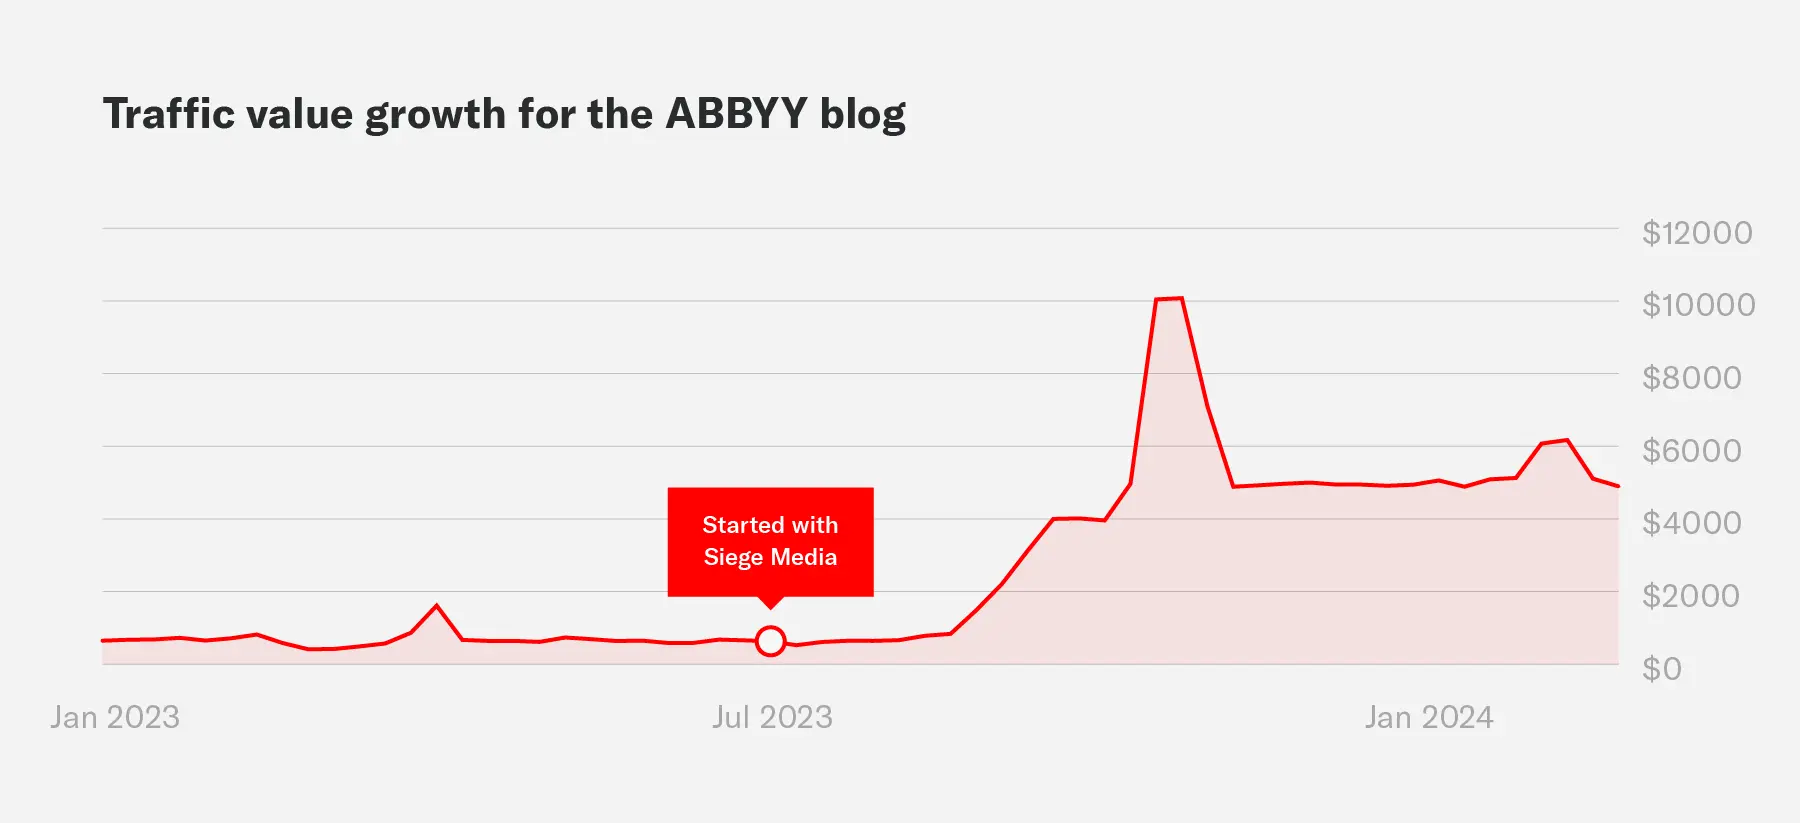 A graph showing the traffic value growth for ABBYY's blog during an engagement with Siege Media